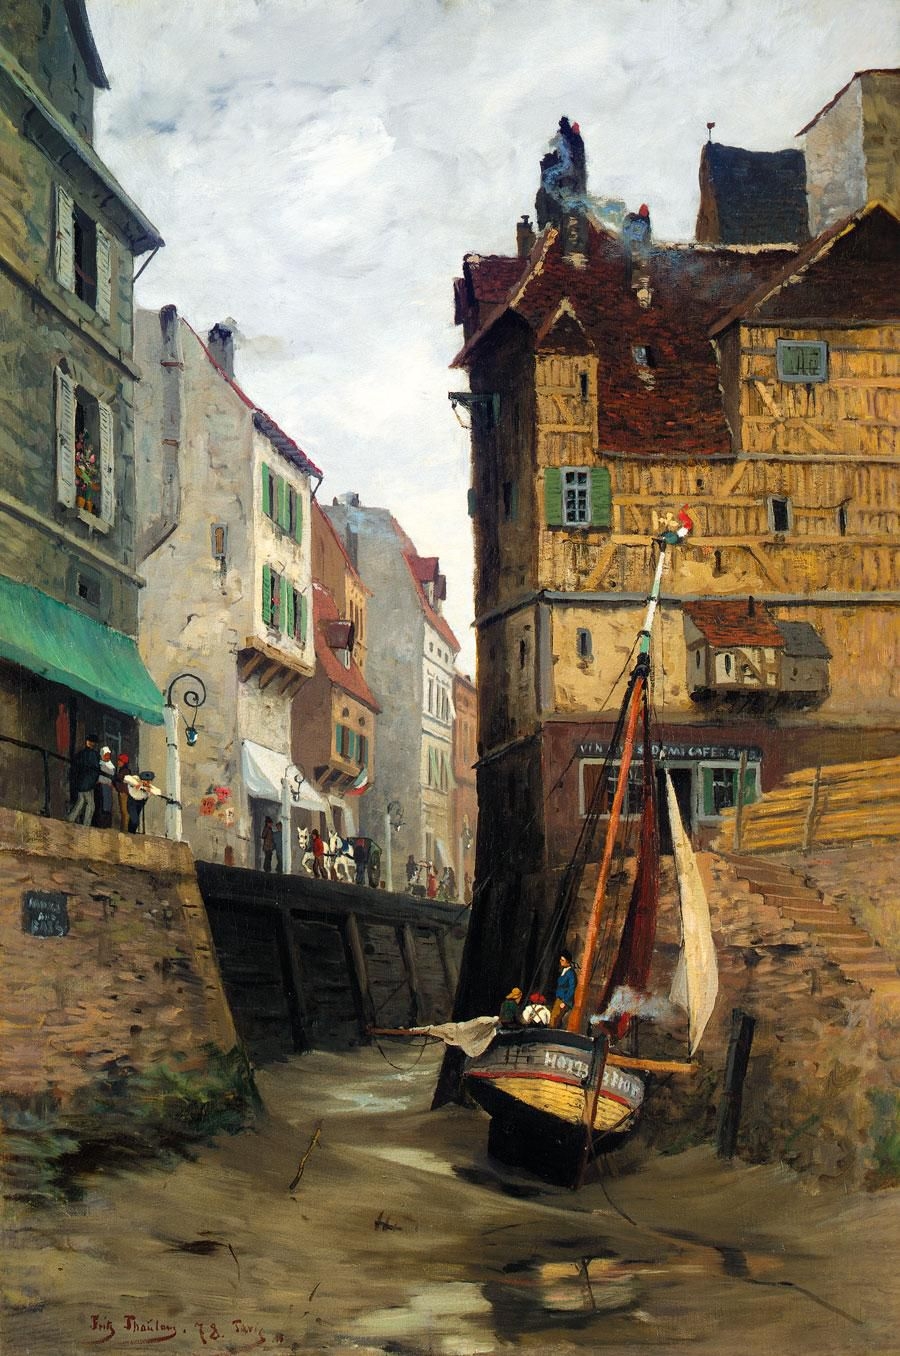 FRA LE HAVRE, LAVVANN (FROM LE HAVRE, LOW WATER) by Frits Thaulow